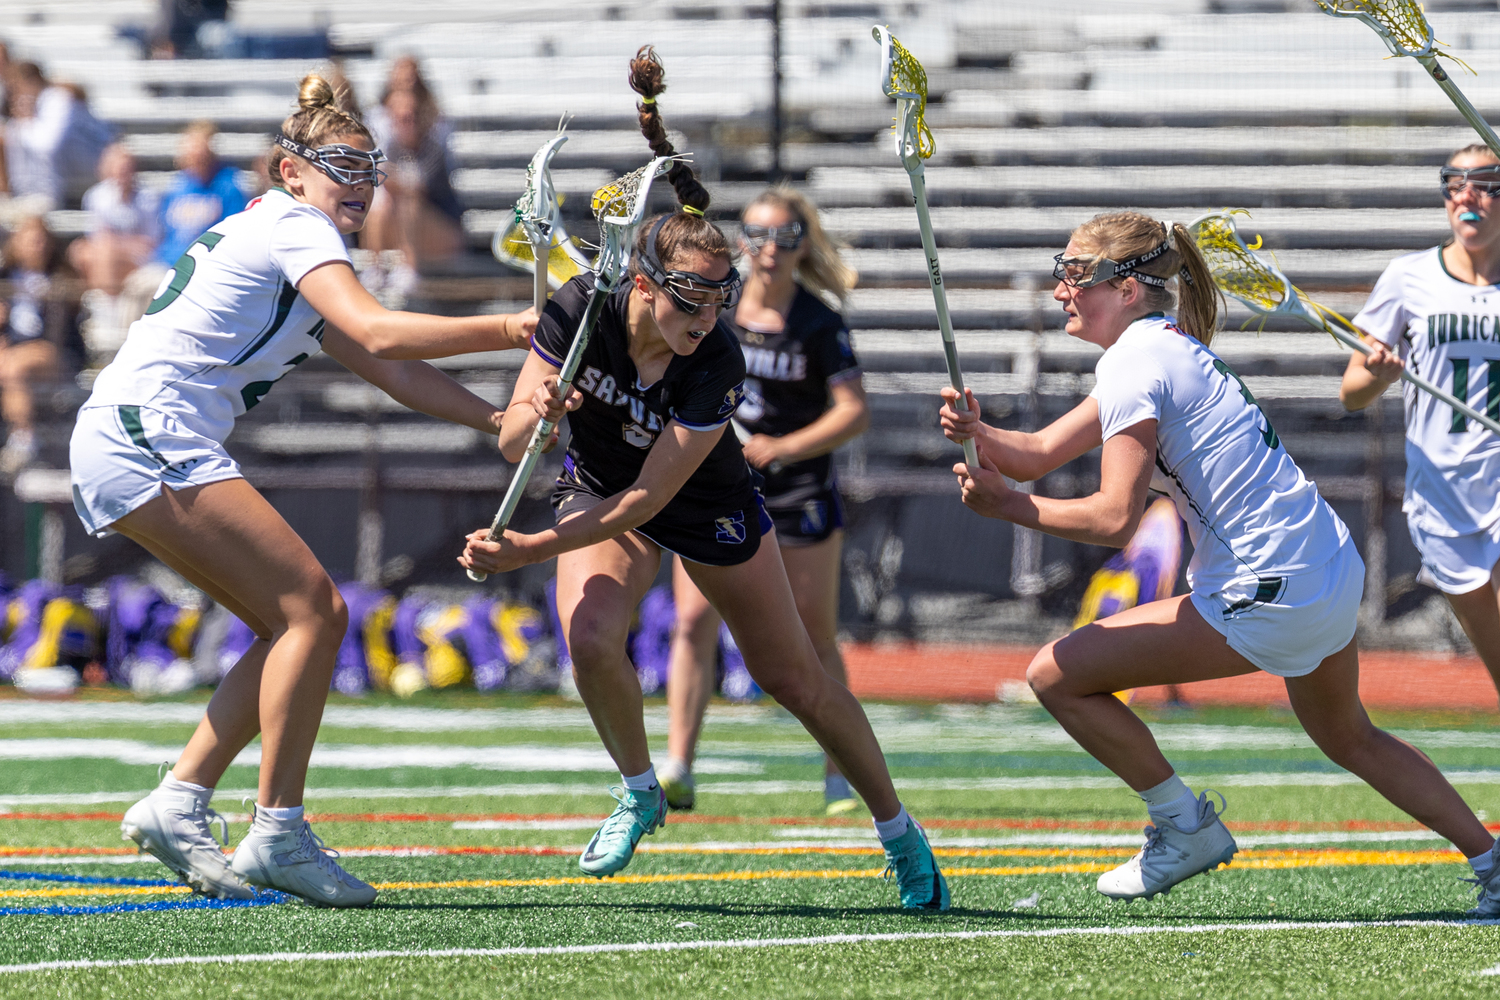 Senior defender Gabby Wendel and junior midfielder Lily Graves sandwich a Sayville opponent during a 9-5 loss on April 26. RON ESPOSITO